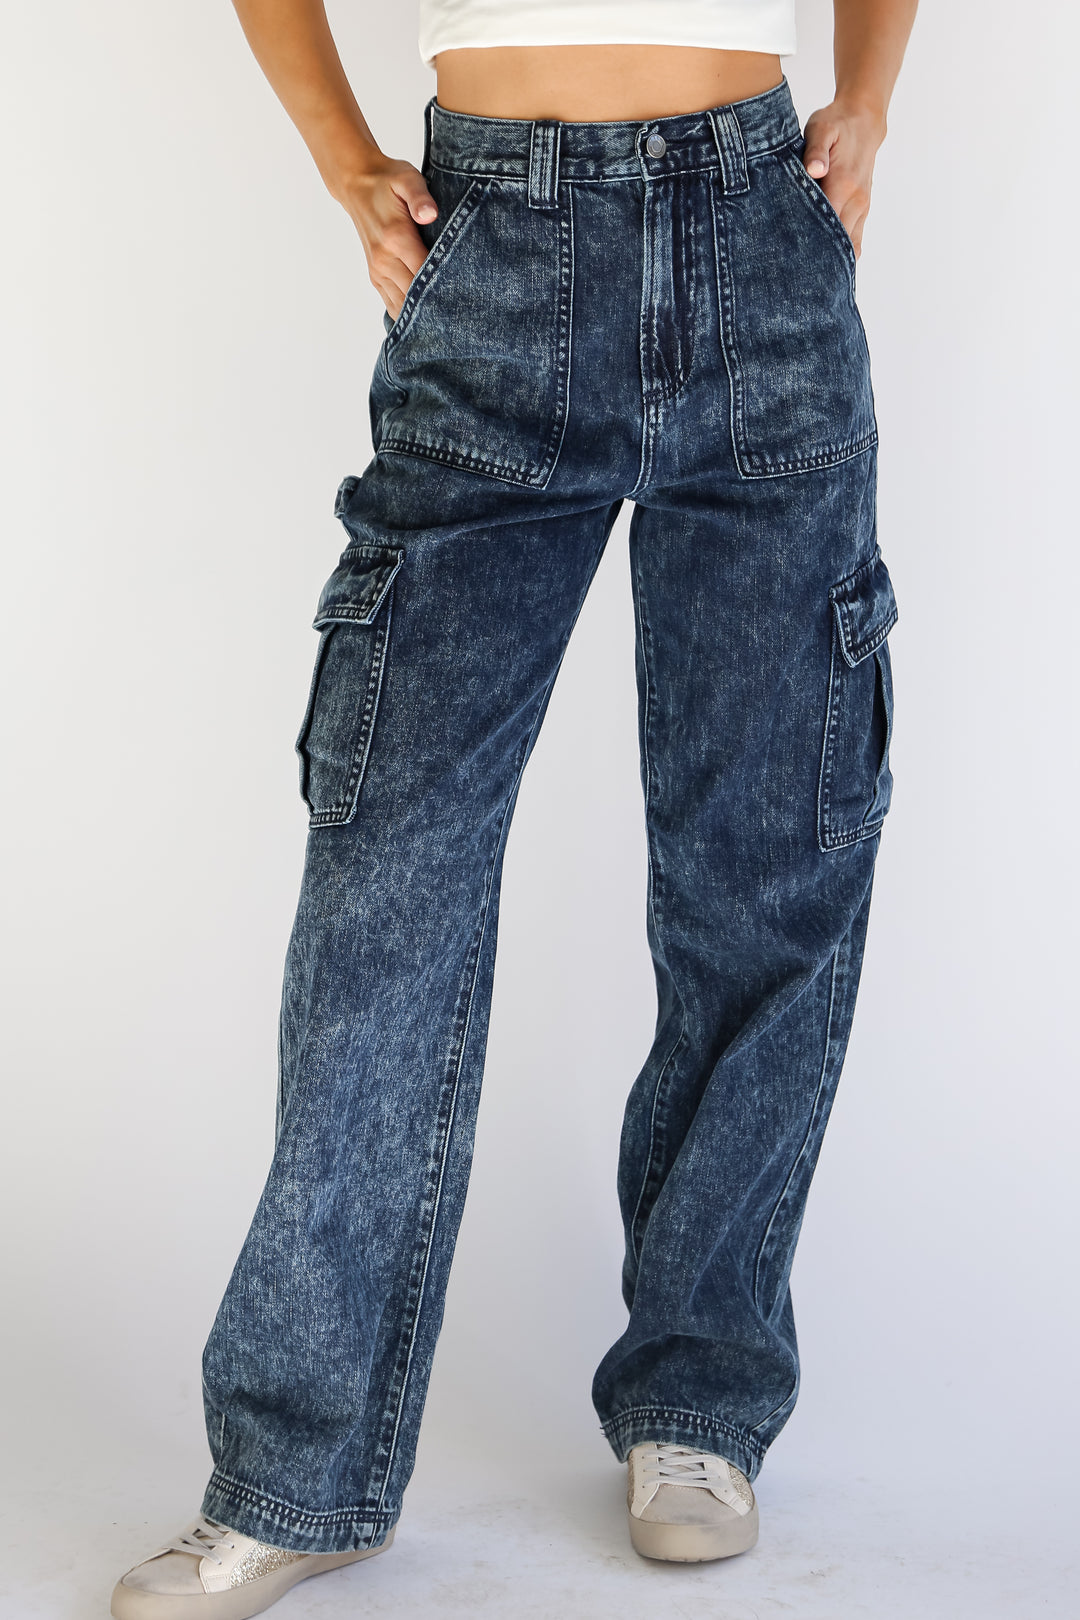 cargo jeans front view